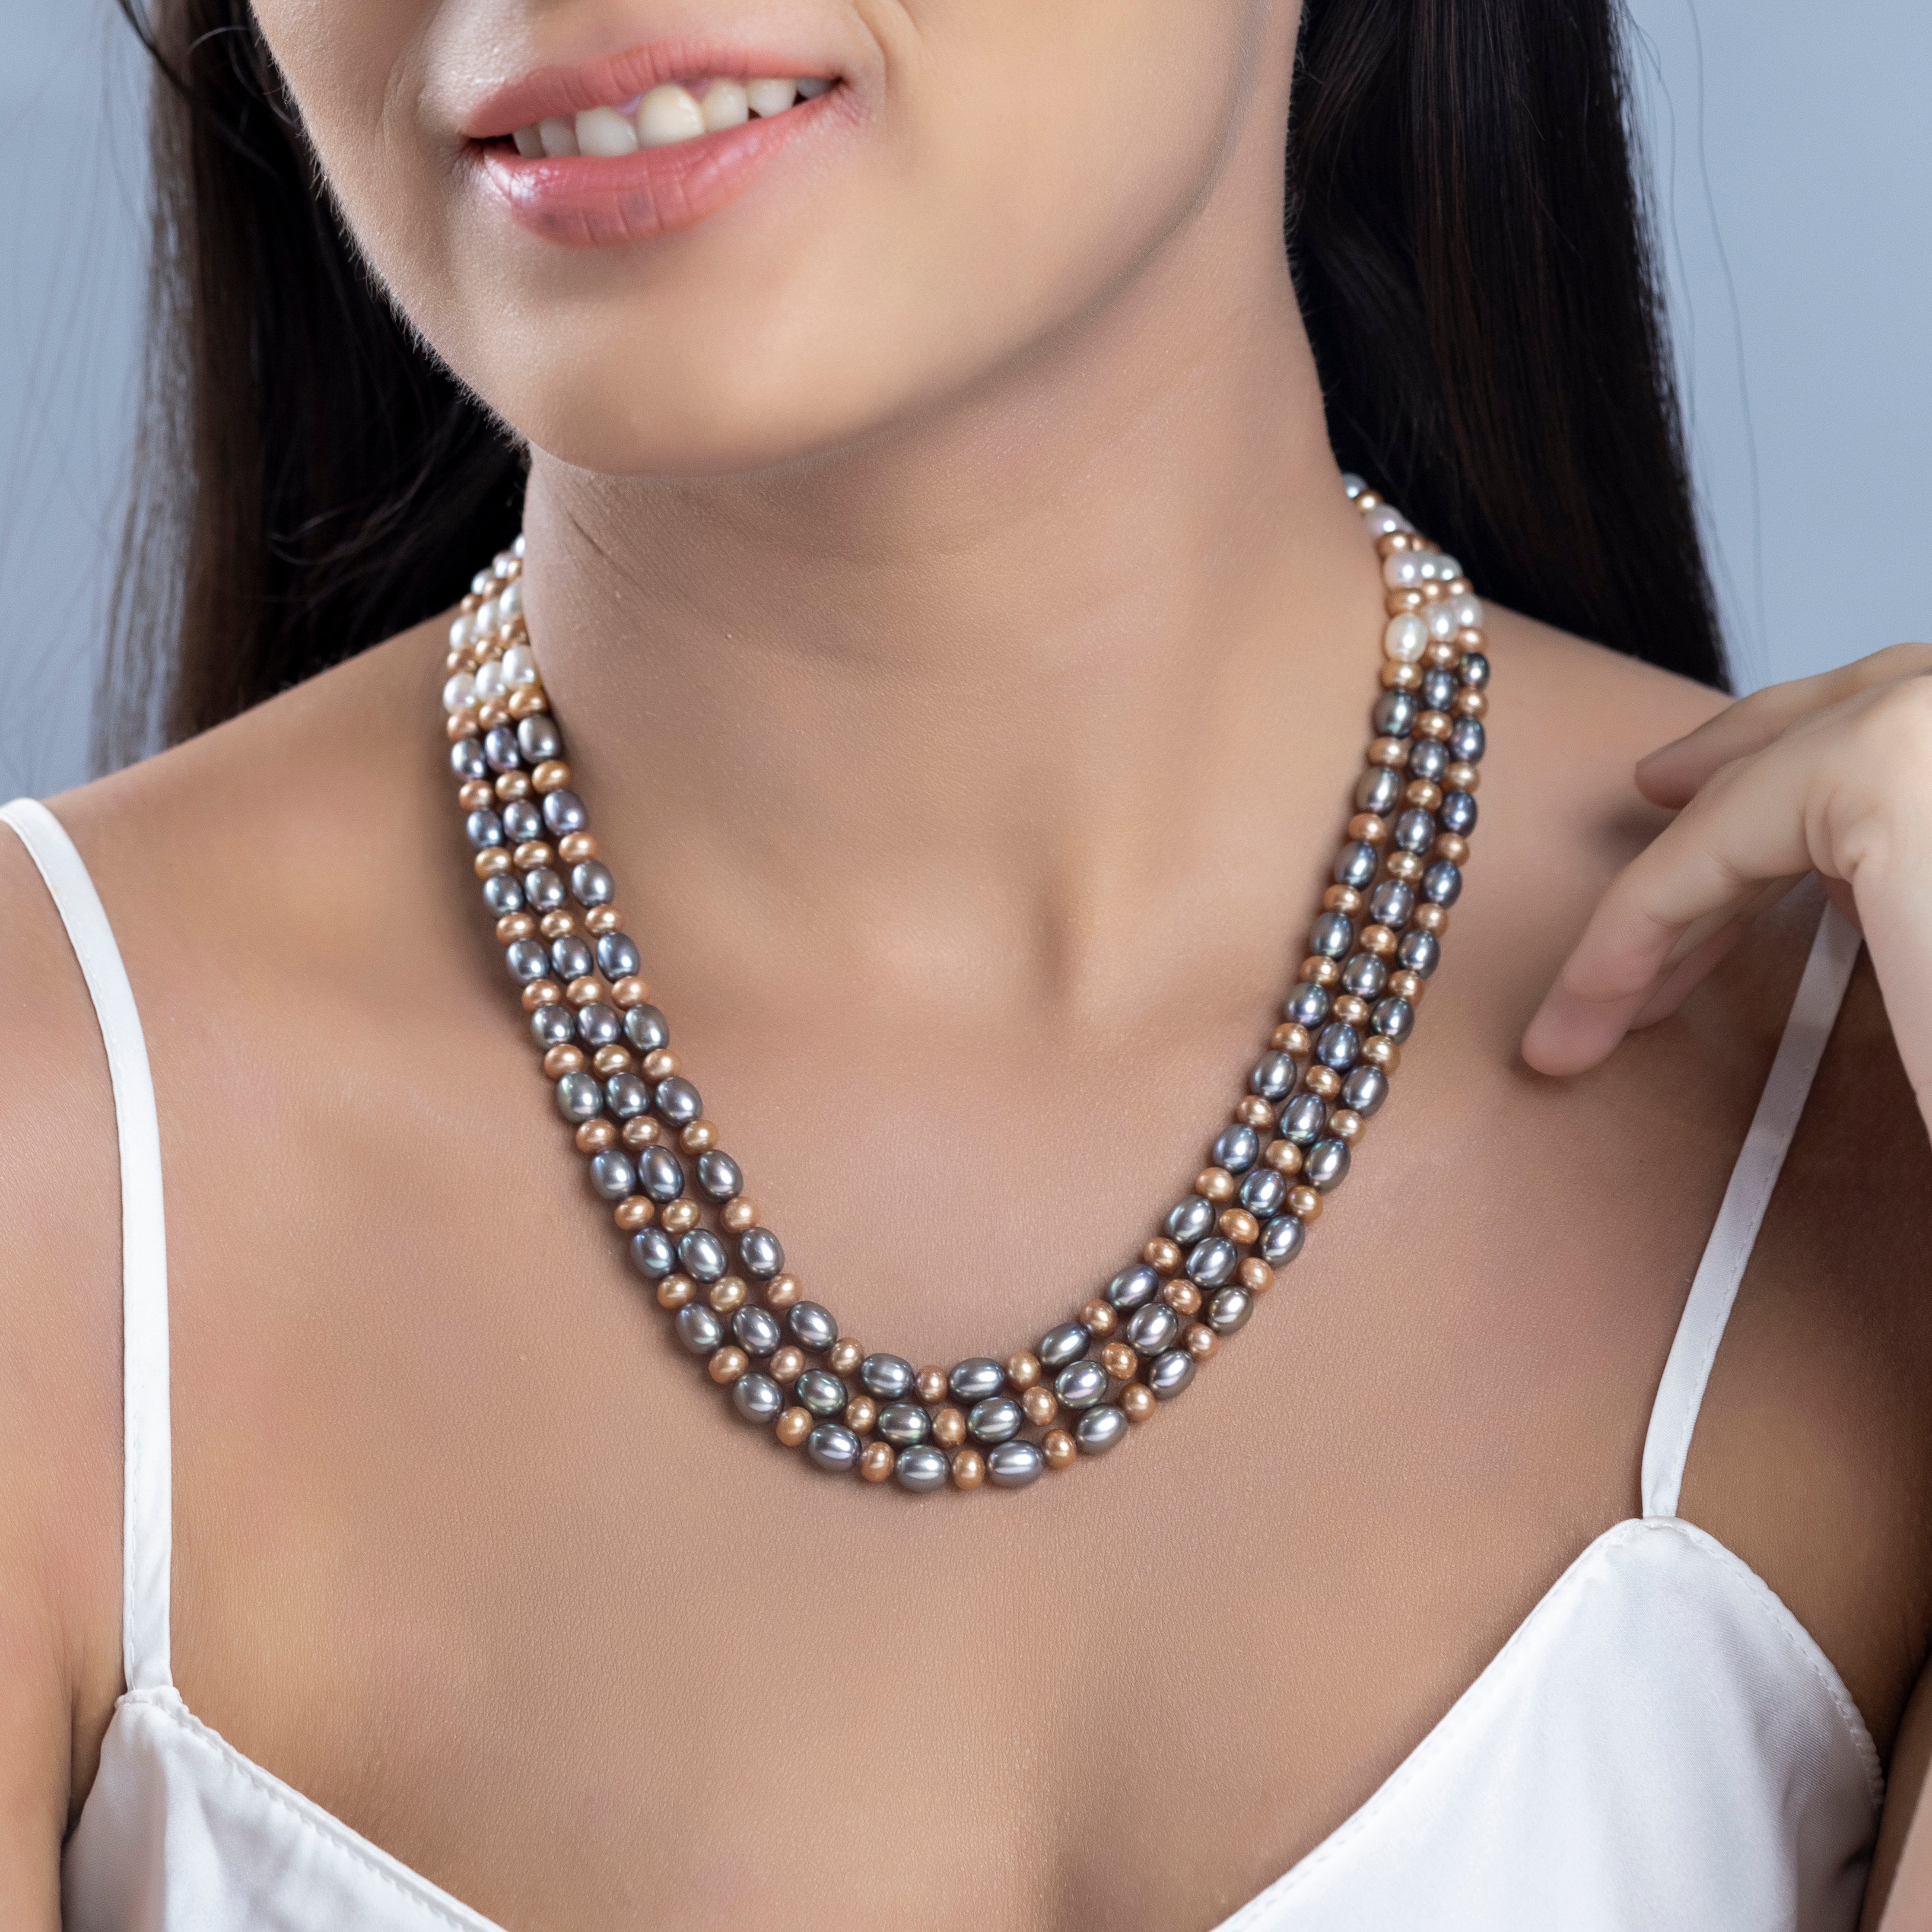 Contrast Harmony Mixed Pearl 3-Line Freshwater NecklaceContrast Harmony Mixed Pearl 3-Line Freshwater Necklace